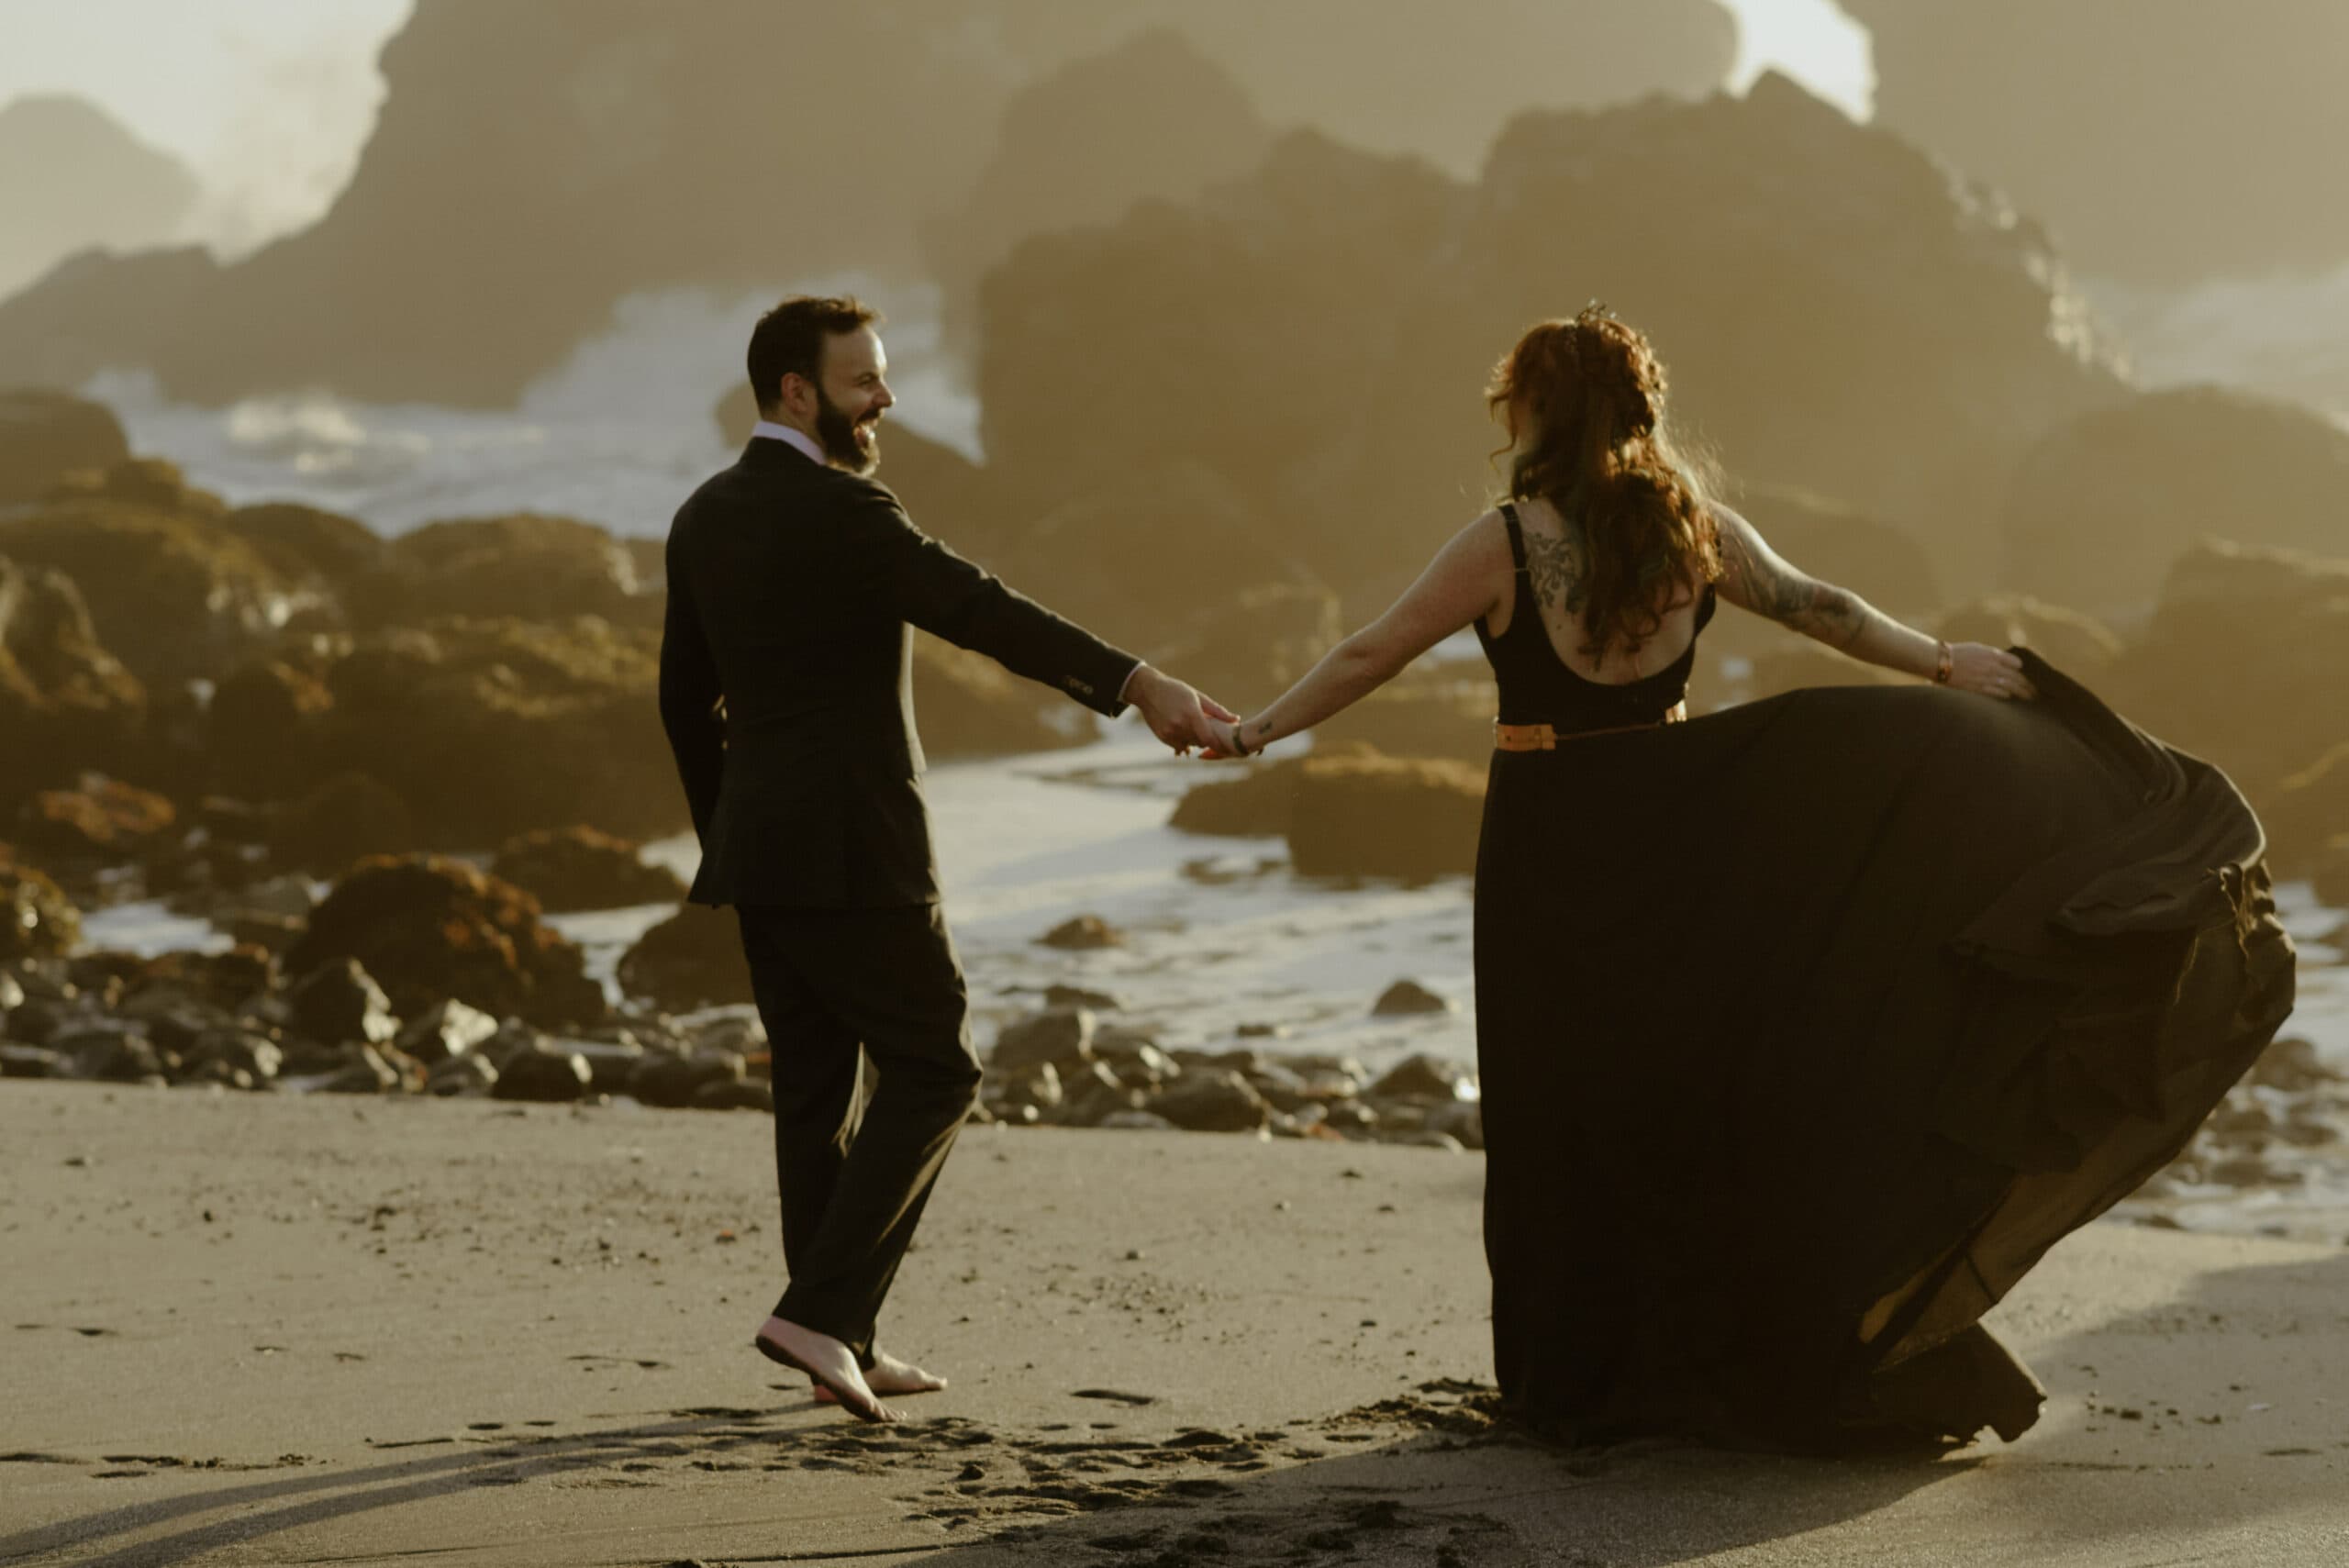 Amanda and Will twirl on Luffenholtz Beach at golden hour following their redwood coast elopement on the Avenue of the Giants.